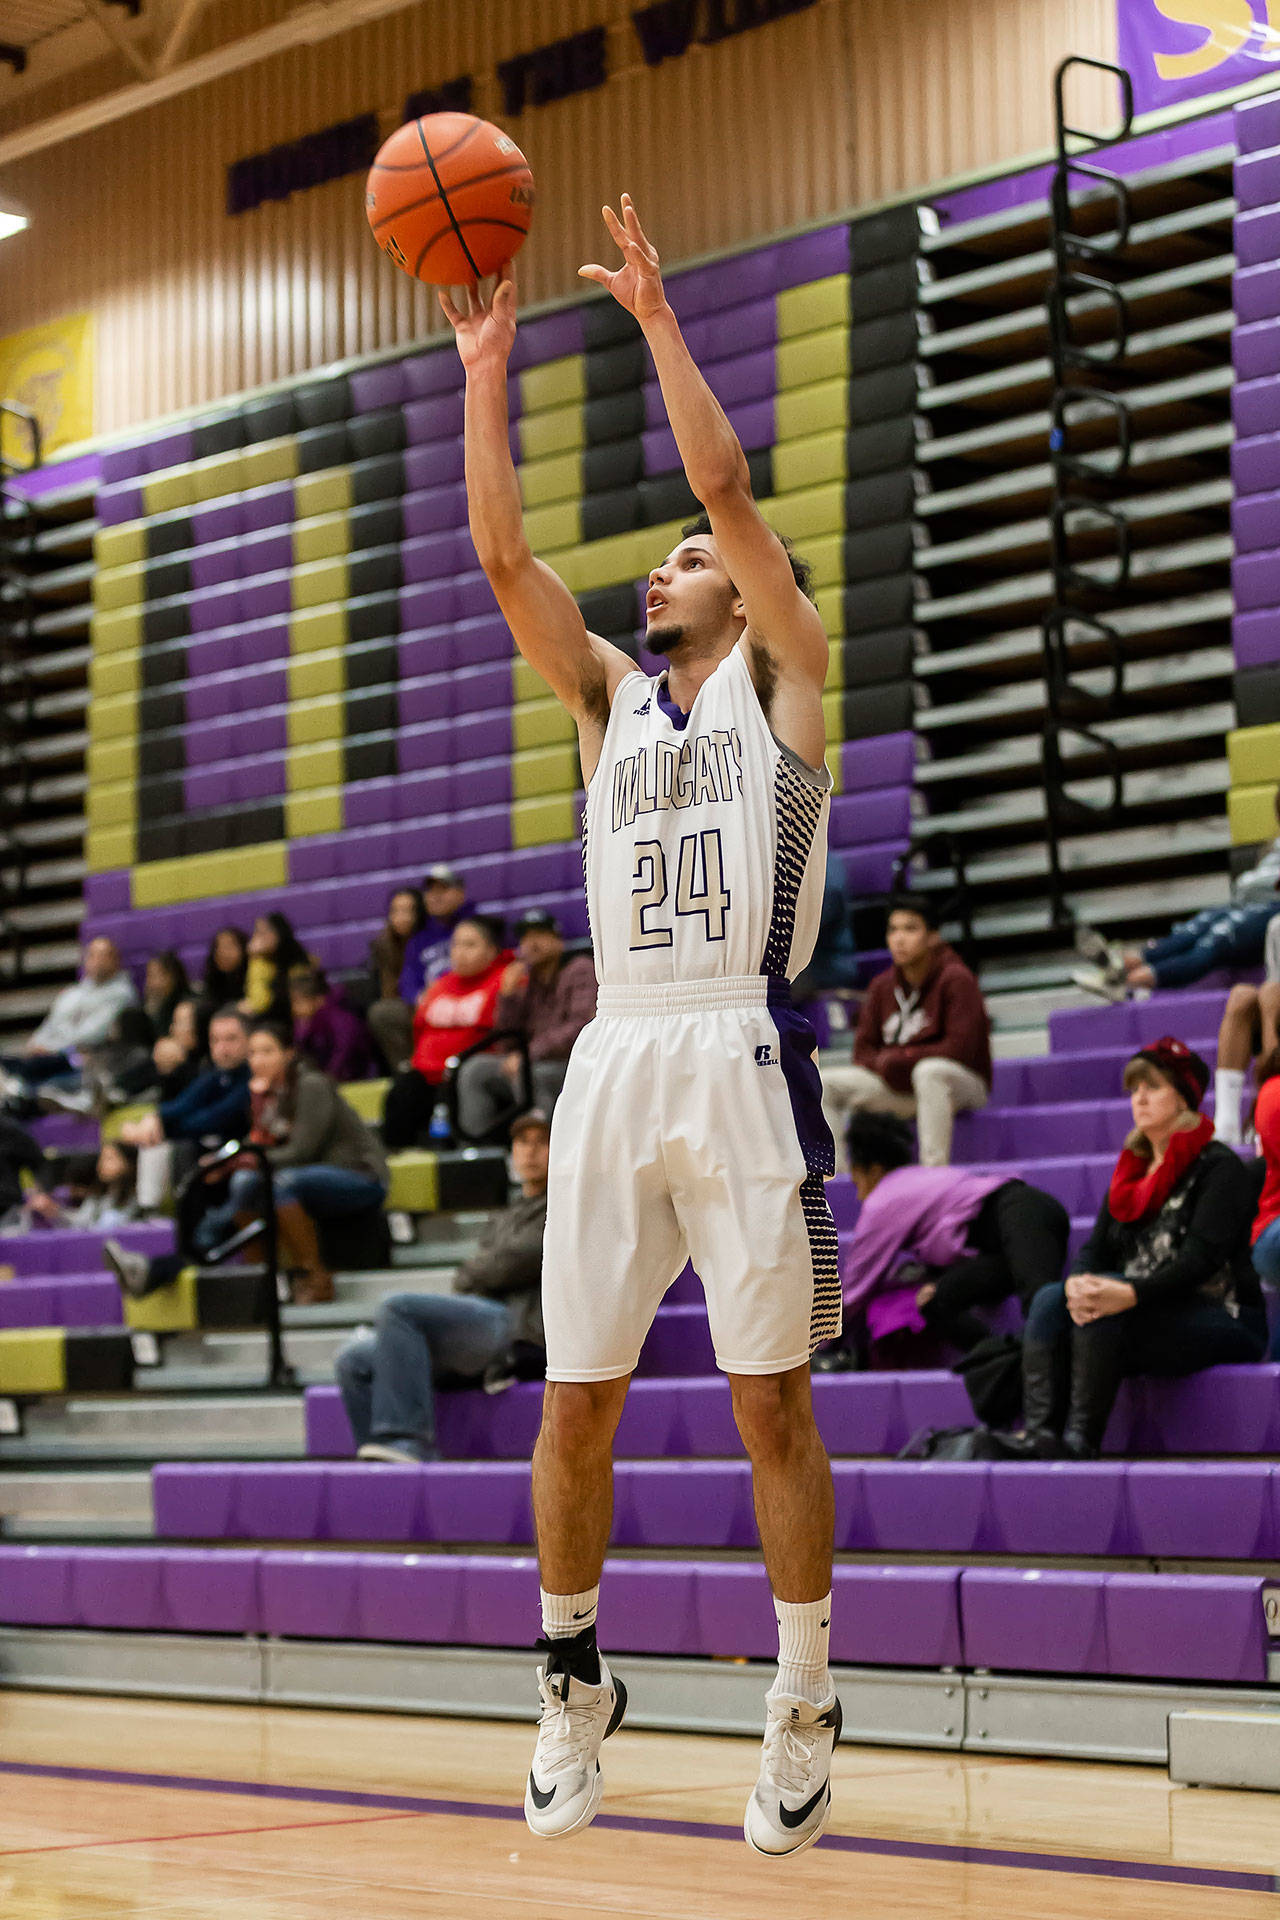 Haven Brown sinks a three-ball on the way to scoring 32 points.(Photo by John Fisken)